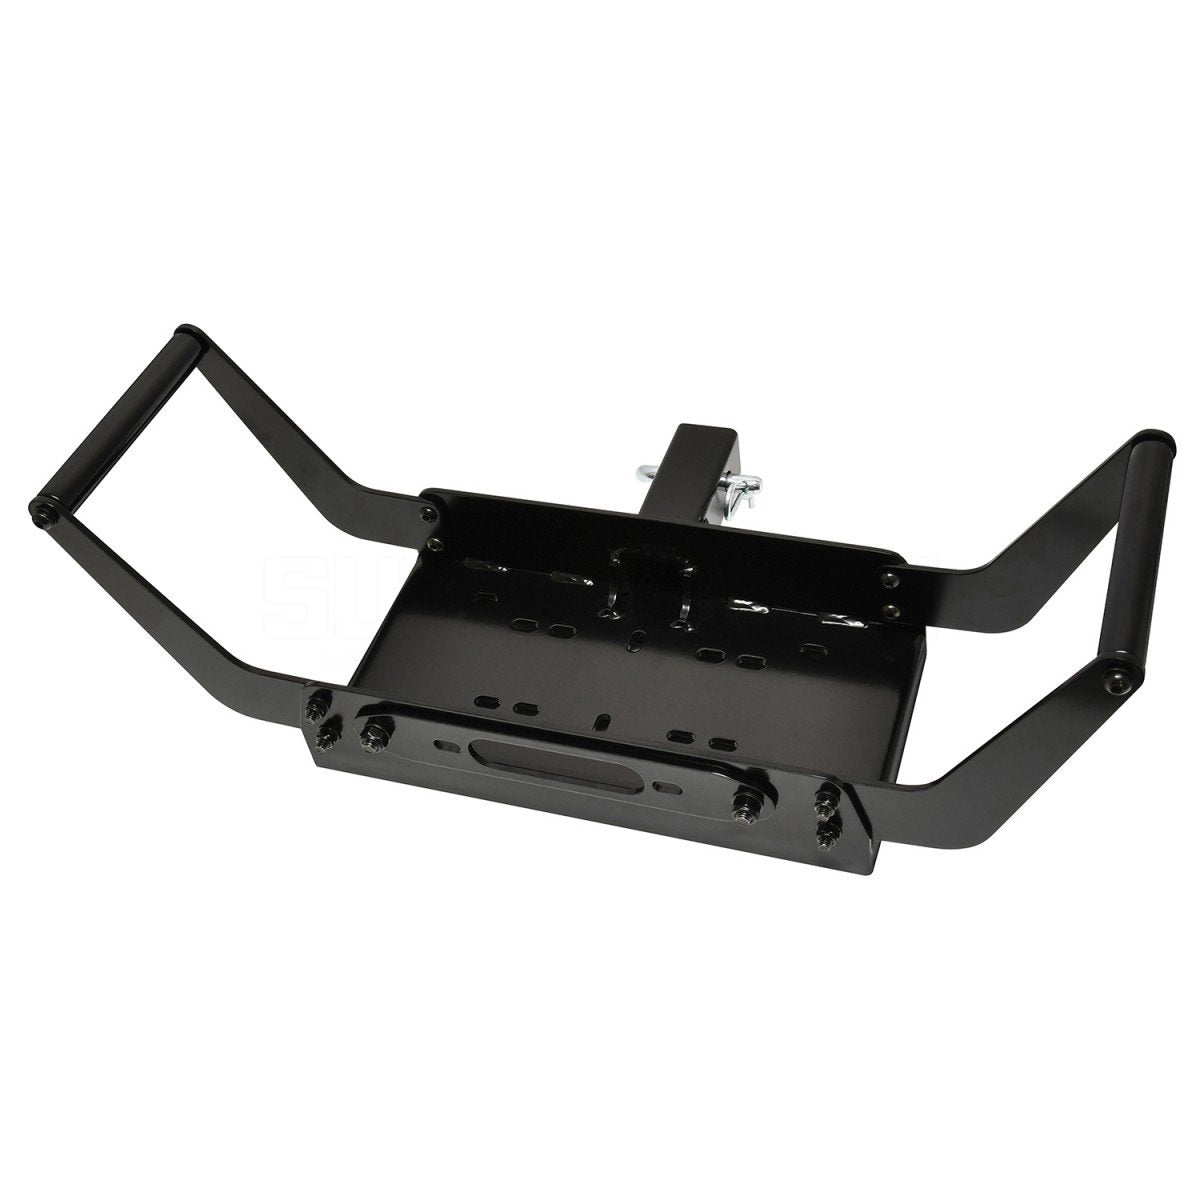 Superwinch 9500 LBS 2in Receiver Cradle Hitch Mount